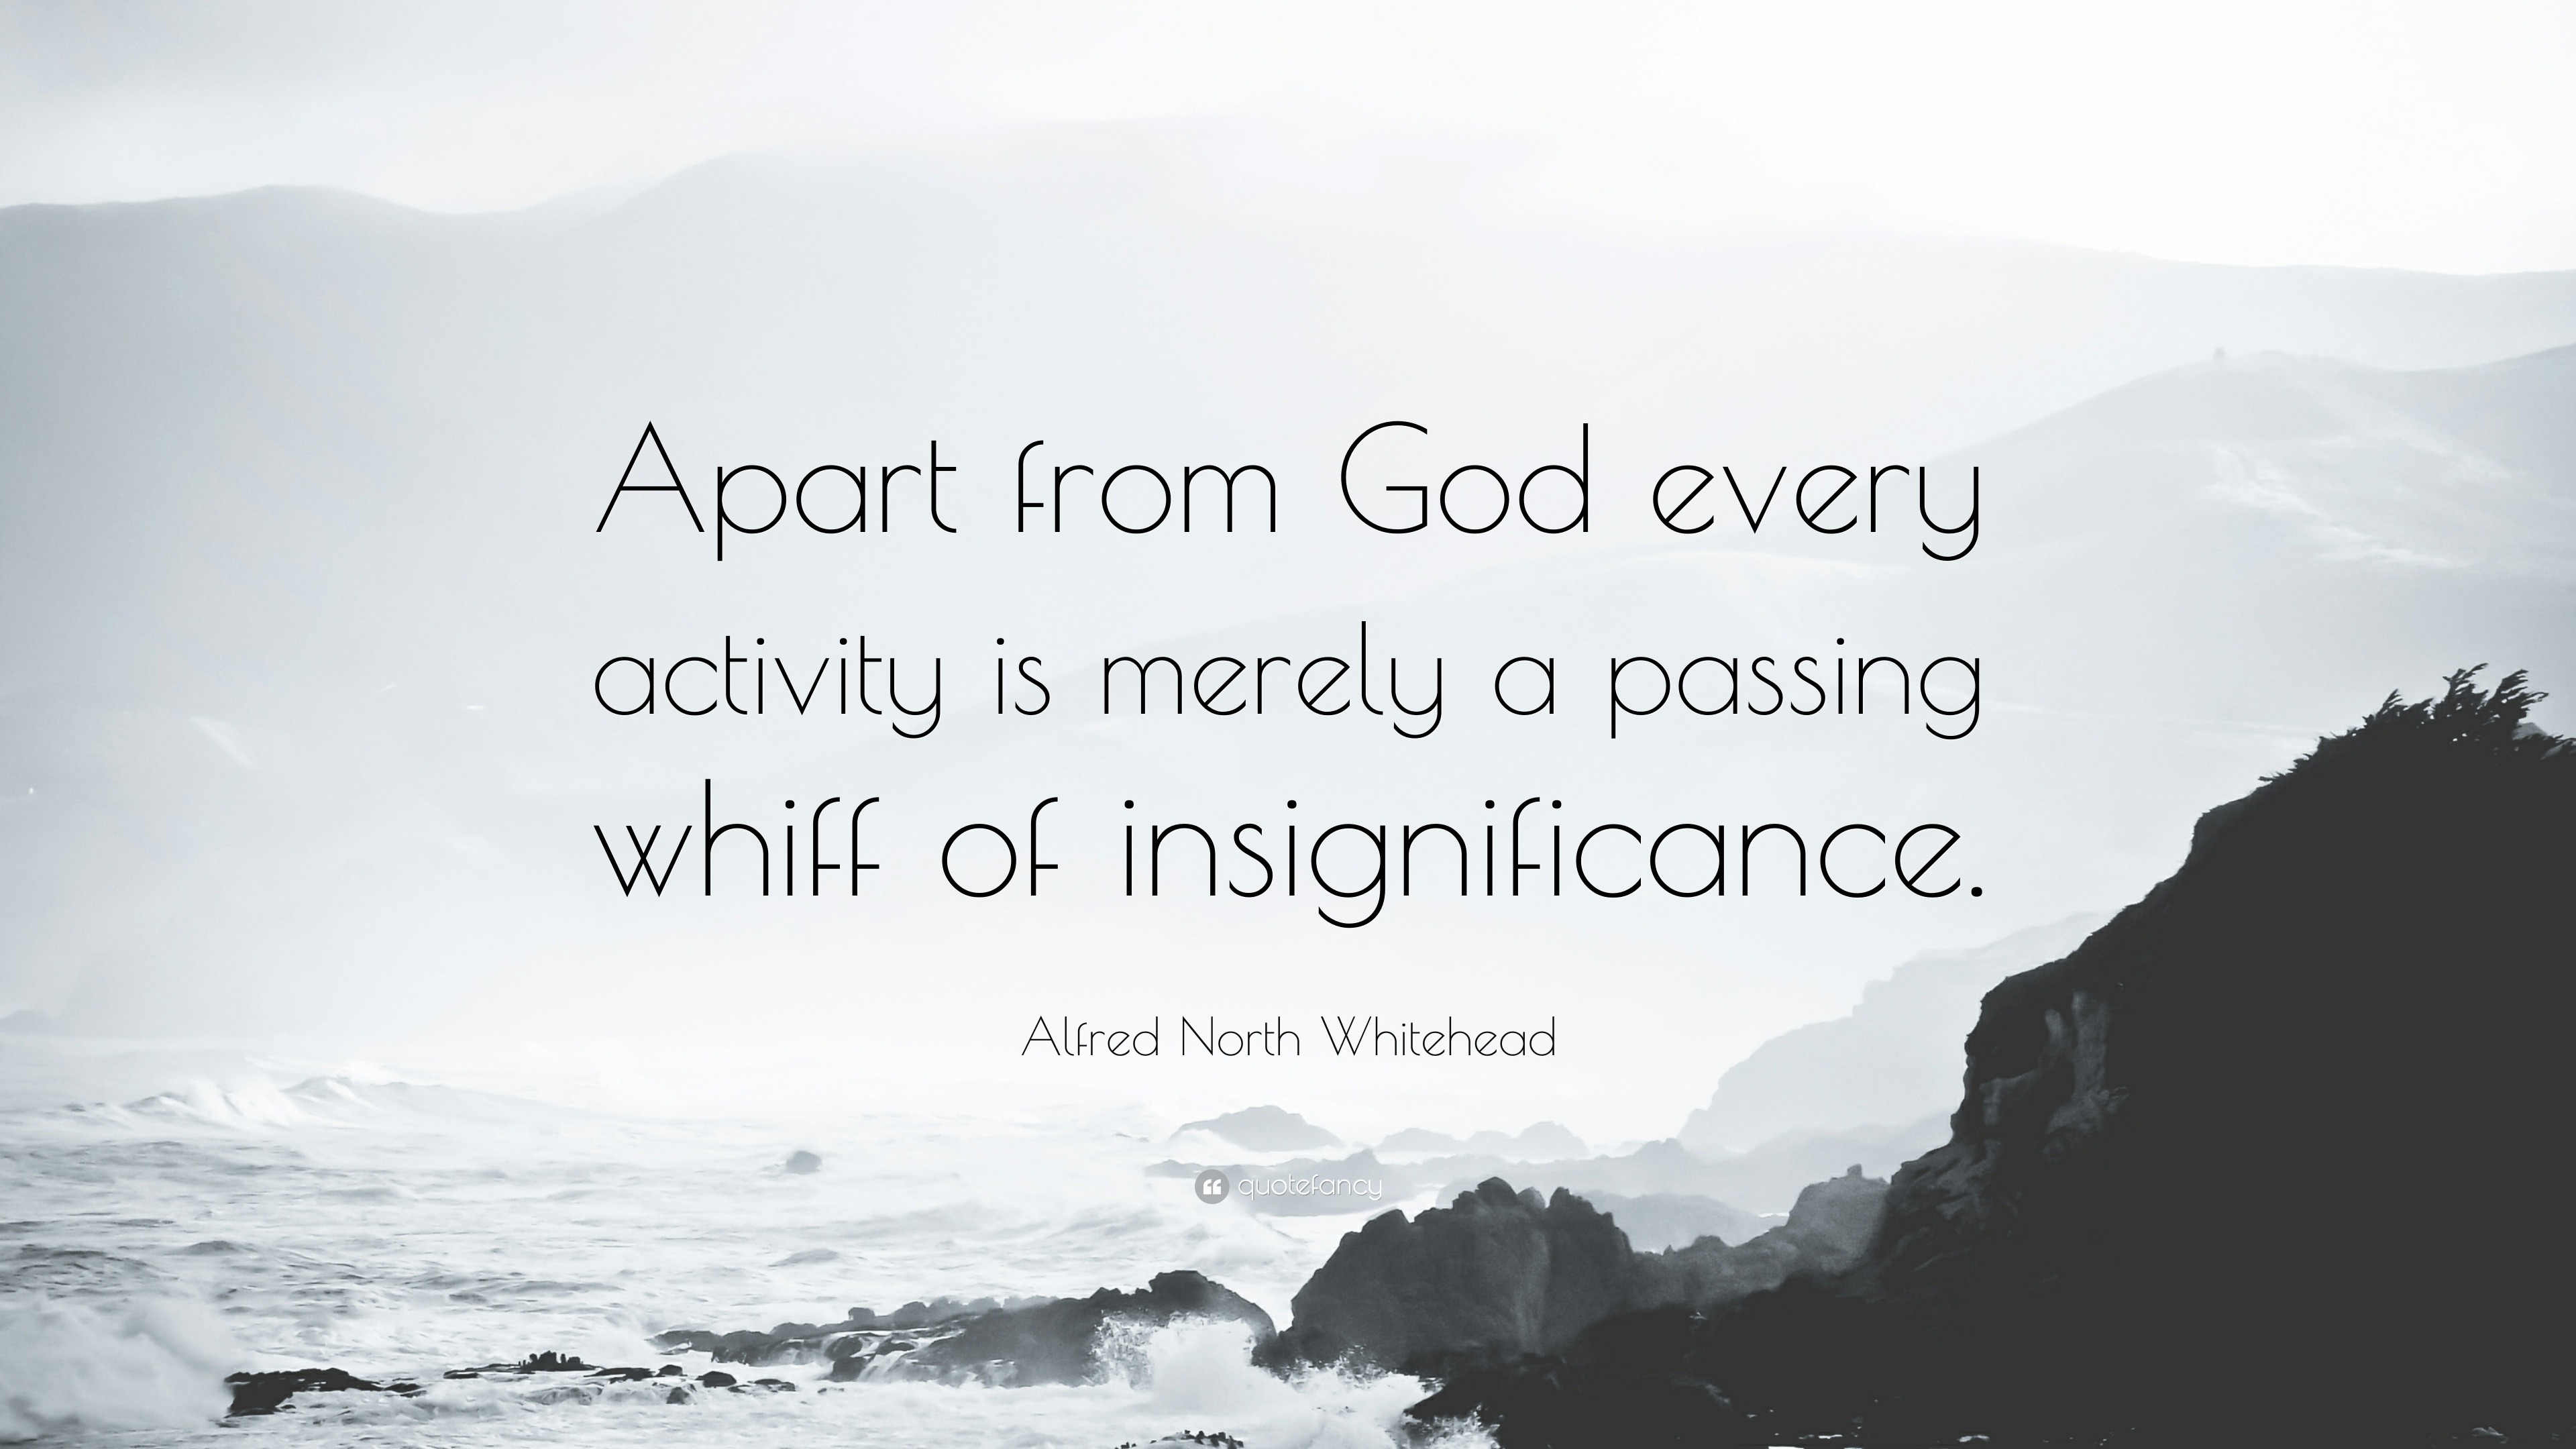 alfred north whitehead believed in god